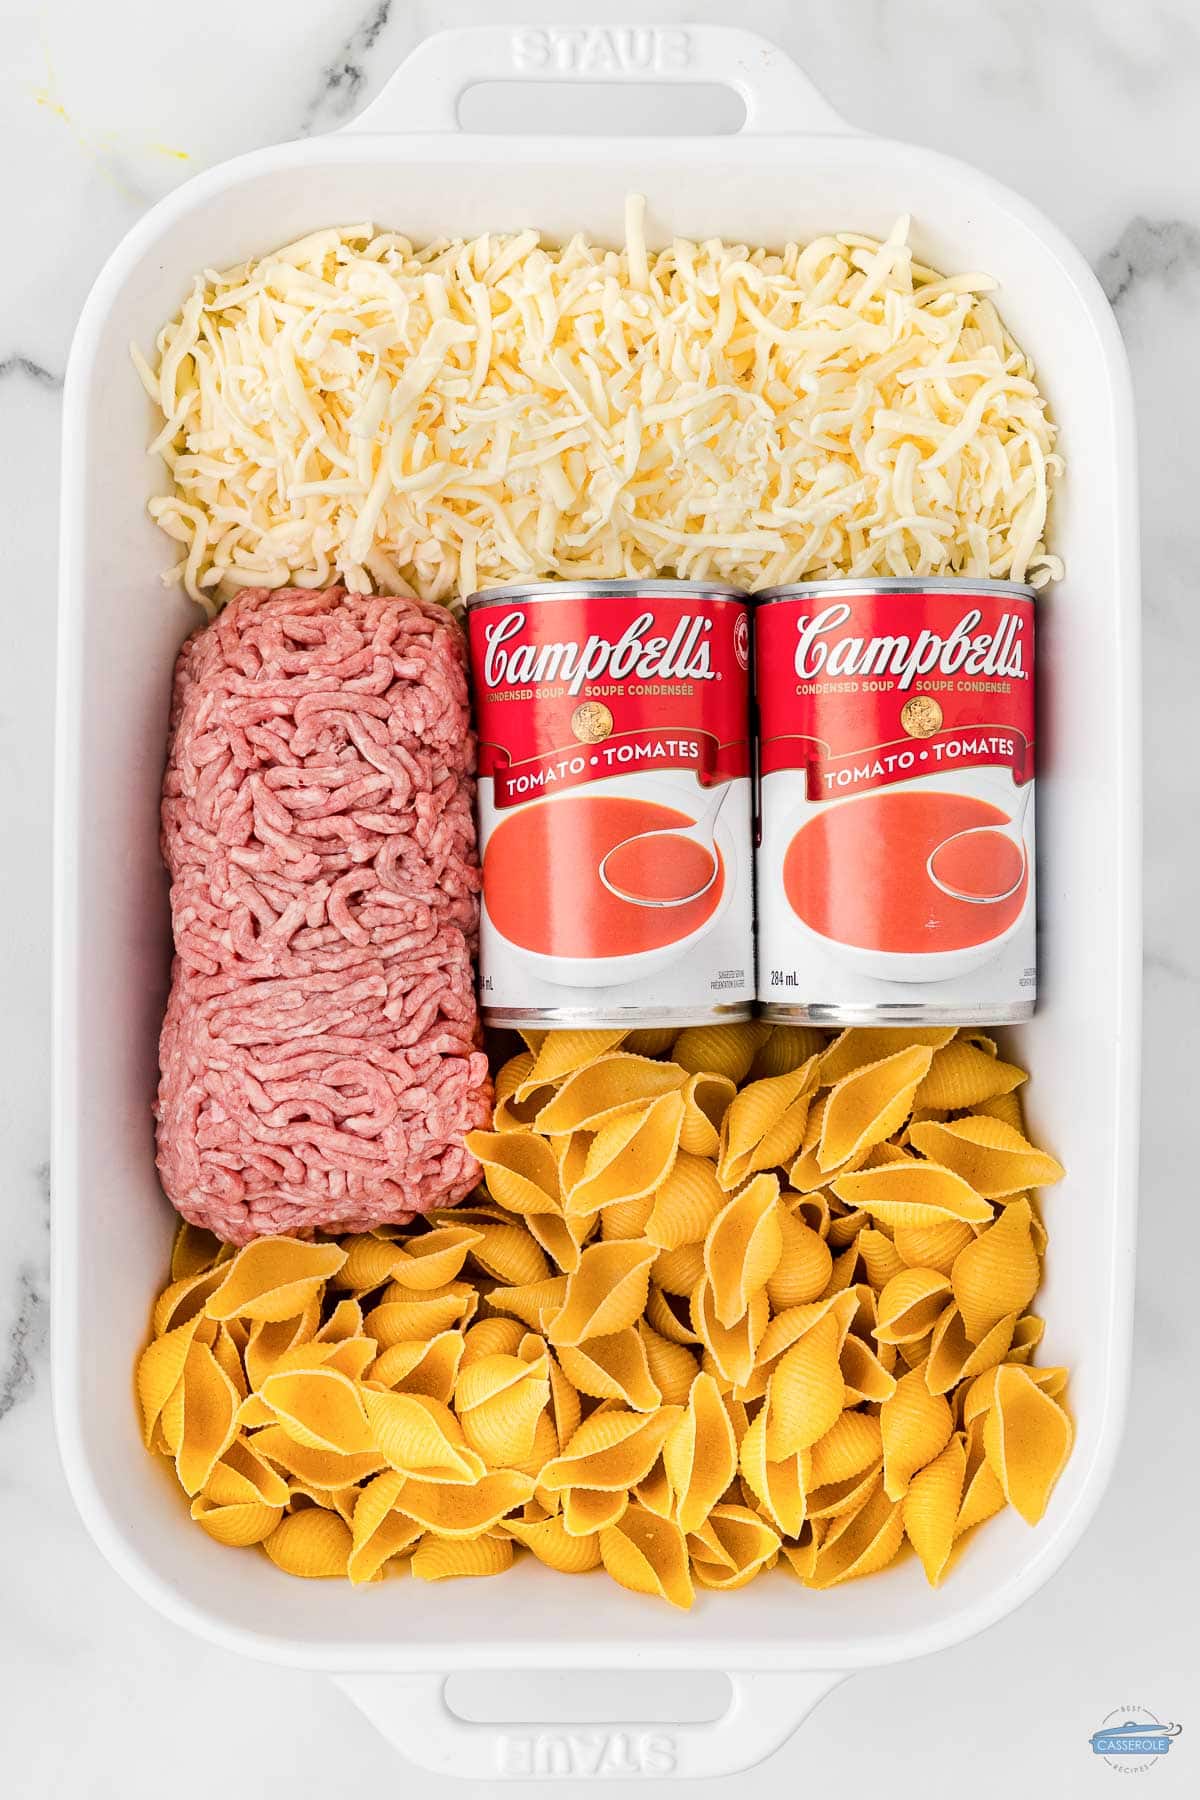 soup cans, pasta noodles, and ground beef in a rectangle casserole dish